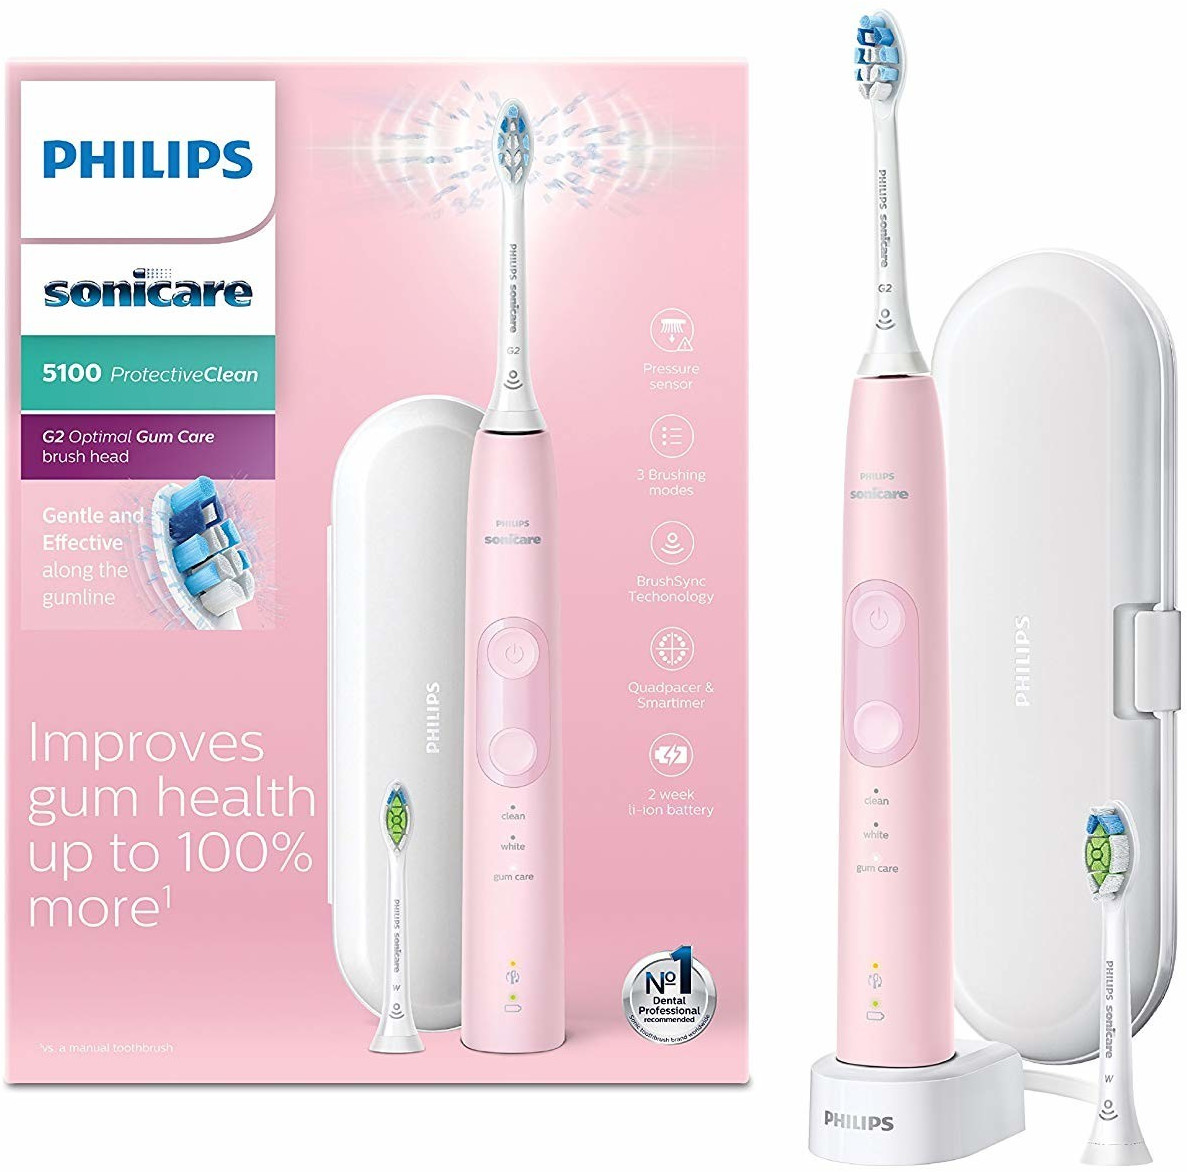 philips-sonicare-protectiveclean-5100-hx6856-10-ab-119-99